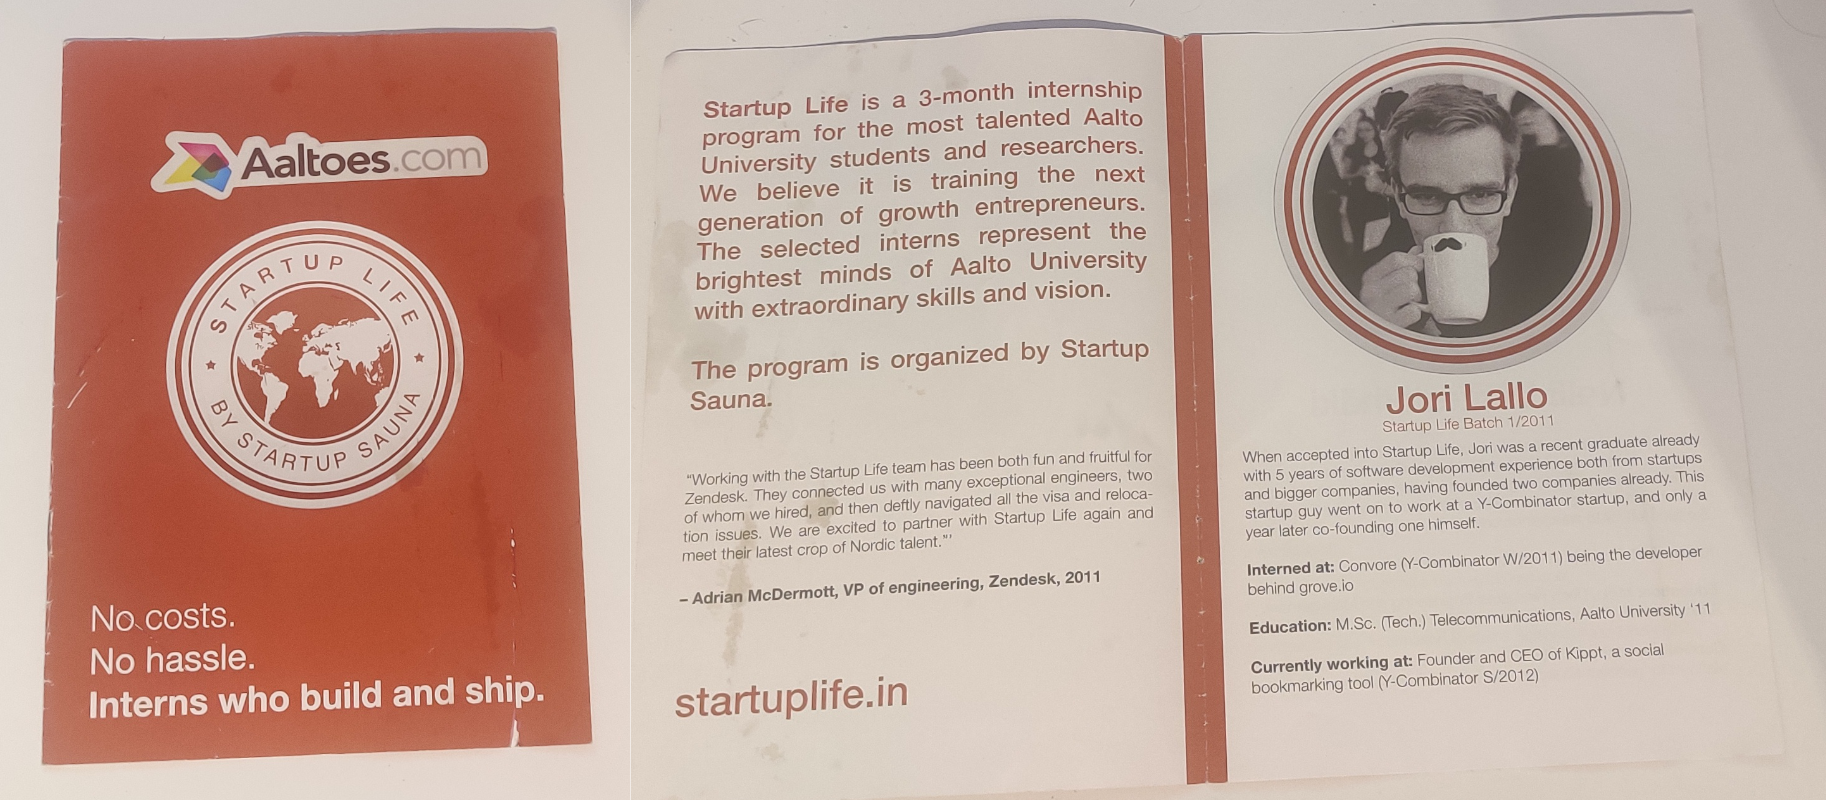 On the left, a front cover of Startup Life booklet with an orange background, Startup Life logo and text “No costs. No hassle. Interns who build and ship.” On the right, the first pages of the booklet explaining the program and featuring Jori Lallo as an alumni. 